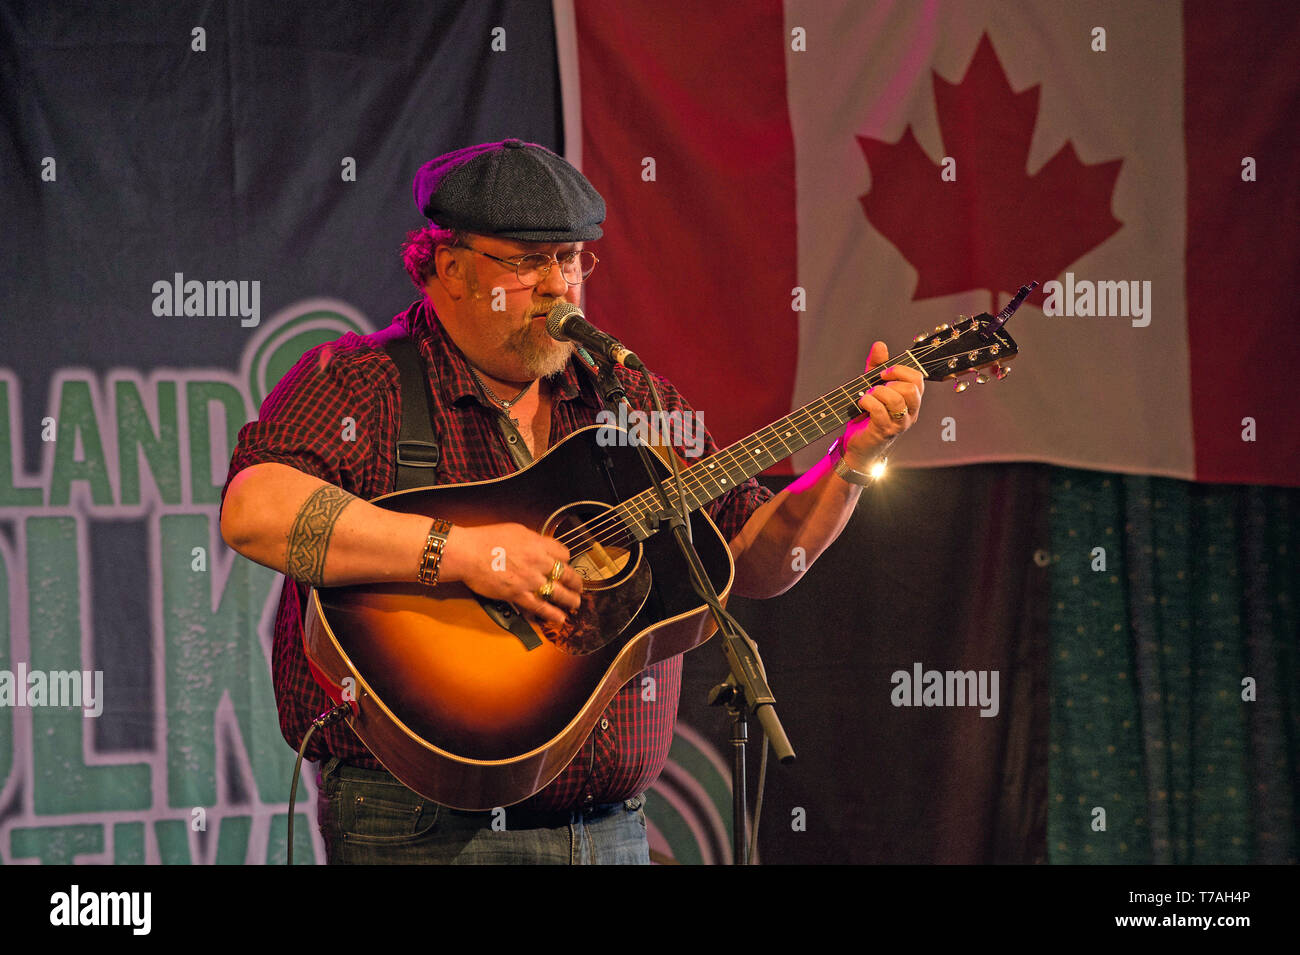 J.P. Cormier playing at the Shetland Folk Festival 2019. He is a Canadian bluegrass folk Celtic singer-songwriter and multi-instrumentalist. Stock Photo